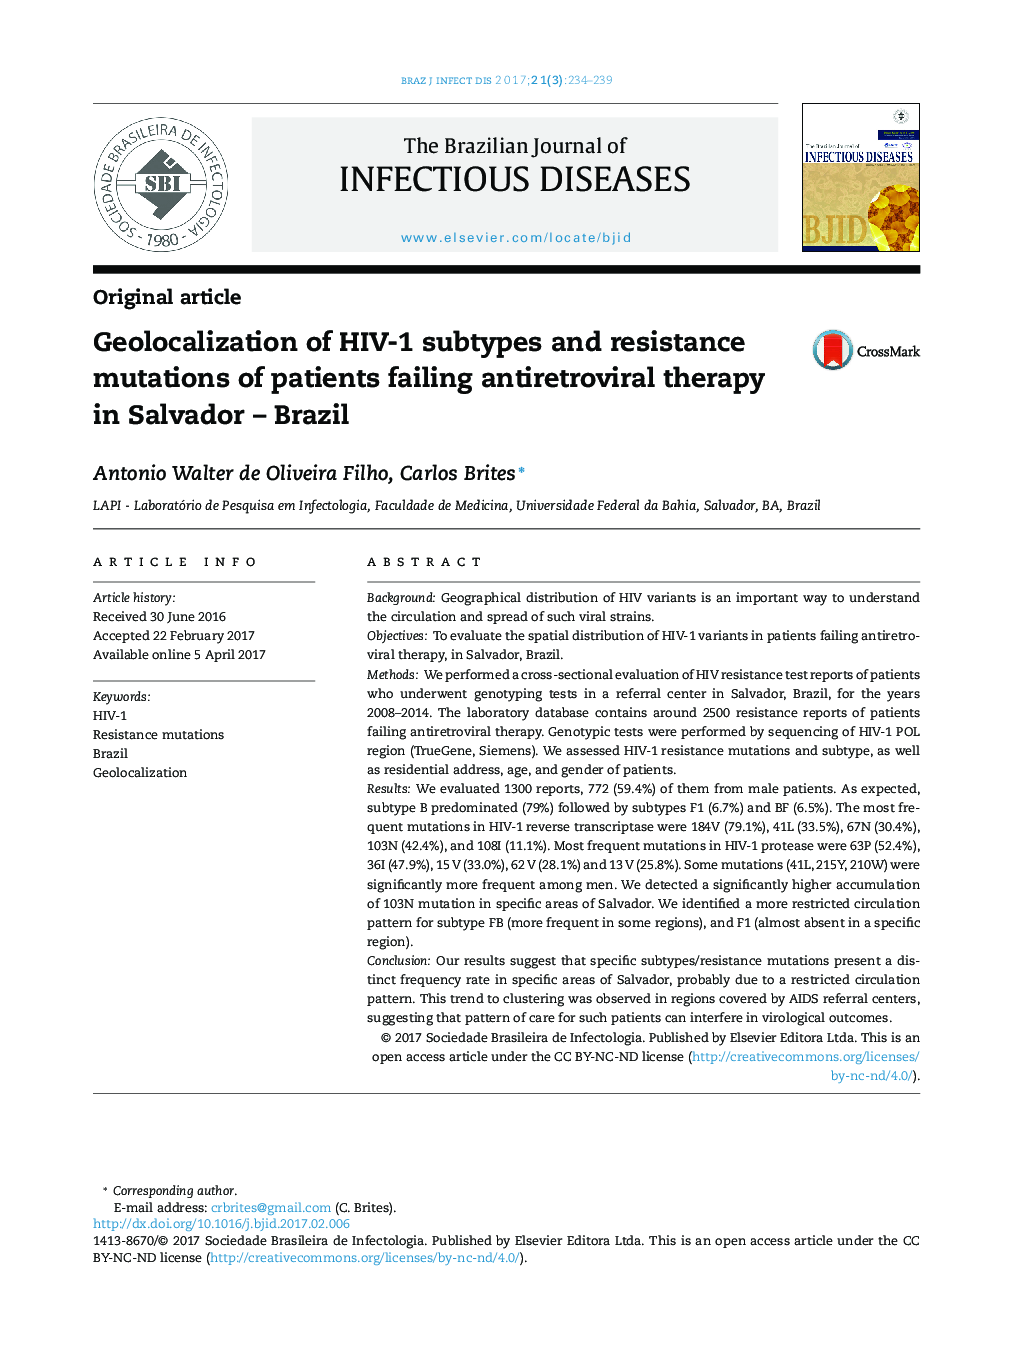 Geolocalization of HIV-1 subtypes and resistance mutations of patients failing antiretroviral therapy in Salvador - Brazil